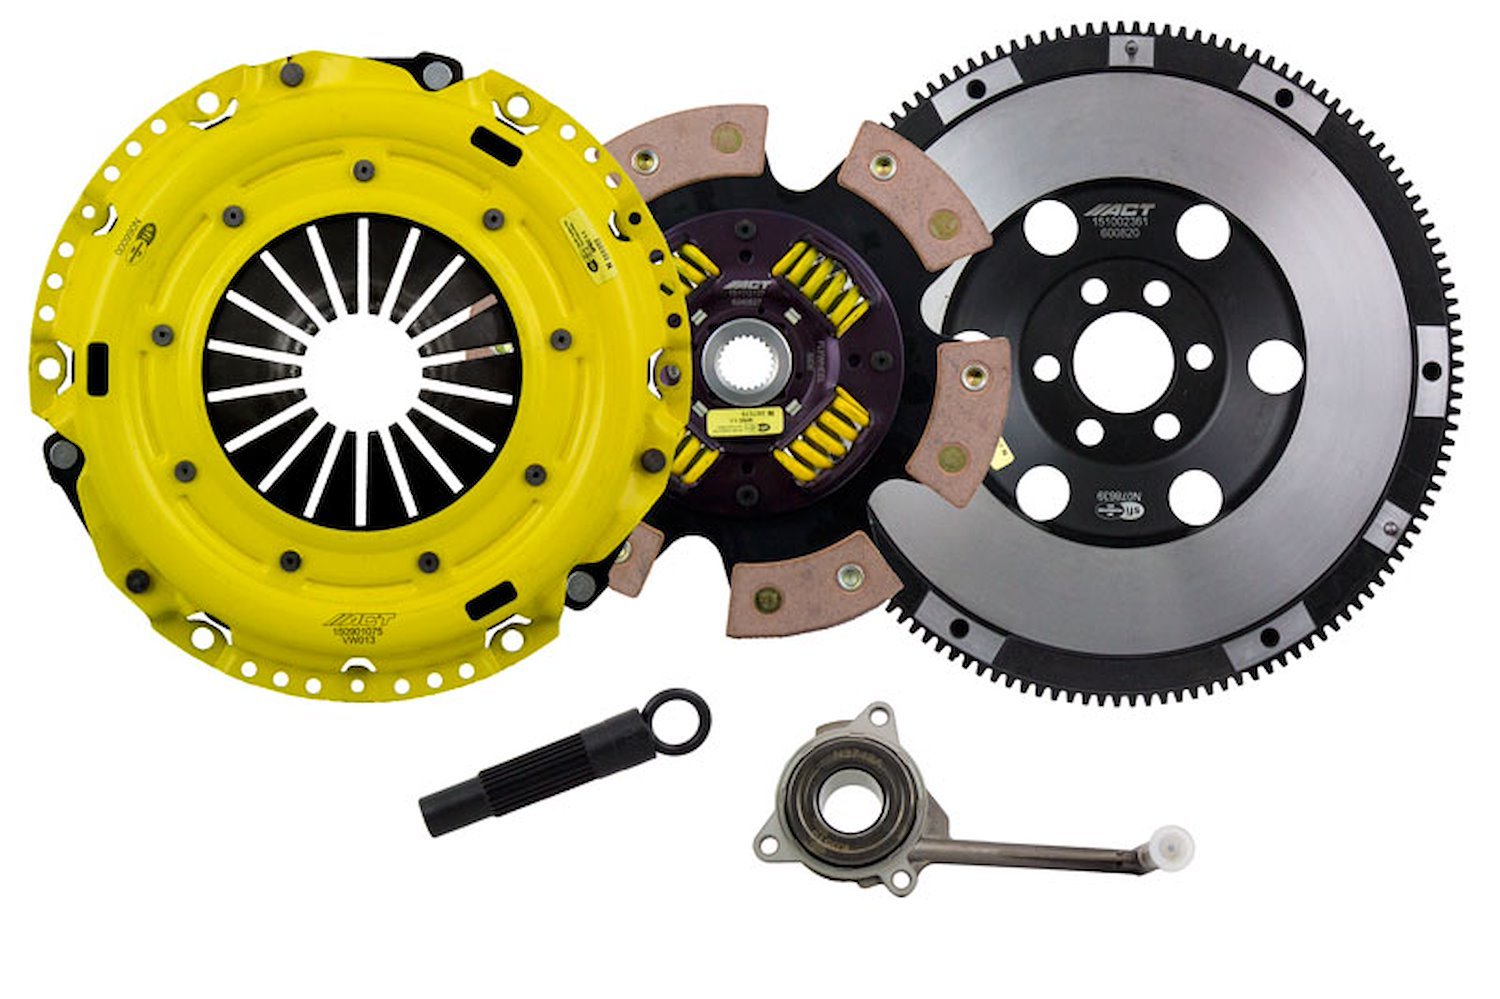 HD/Race Sprung 6-Pad Transmission Clutch Kit Fits Select Audi/Volkswagen